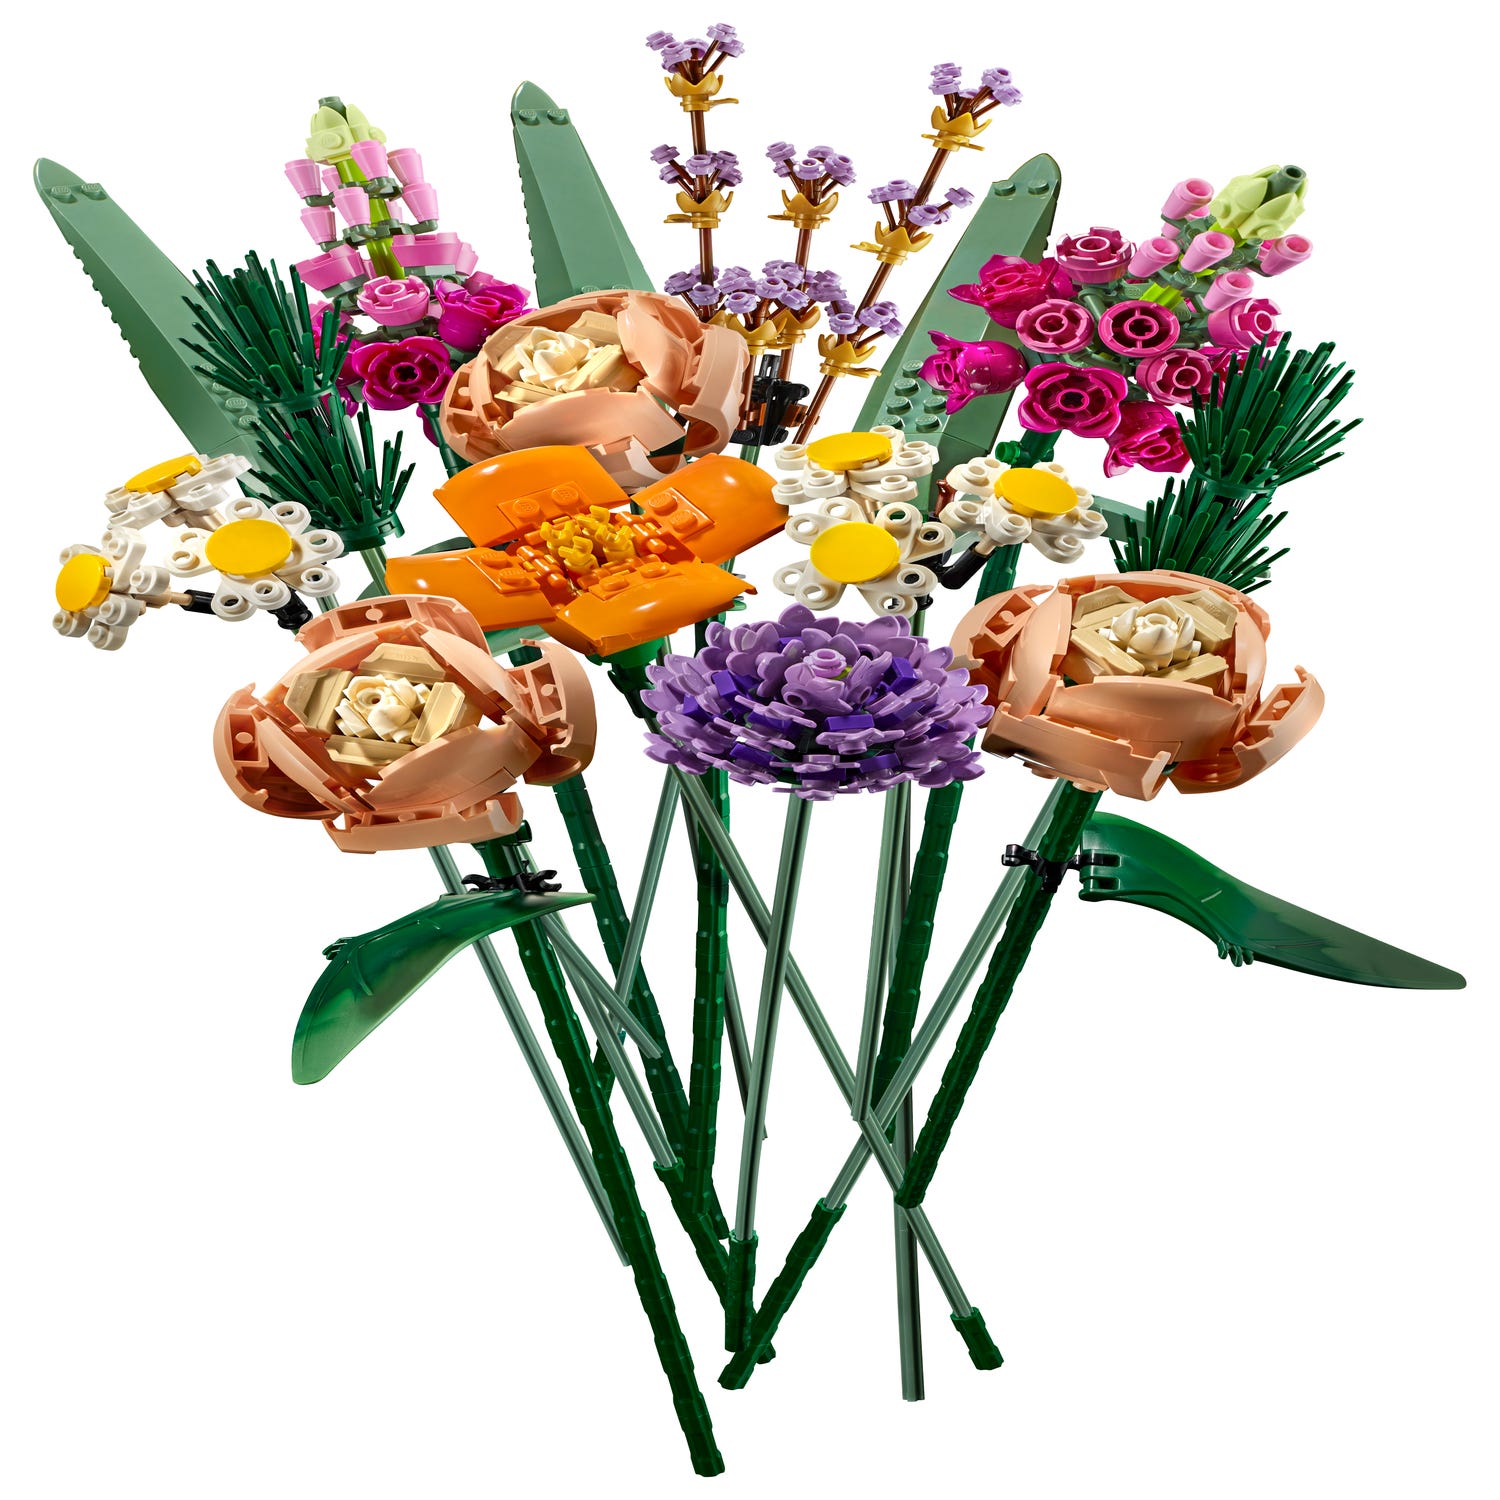 Flower Bouquet 10280 Creator Expert Buy Online At The Official Lego Shop Us